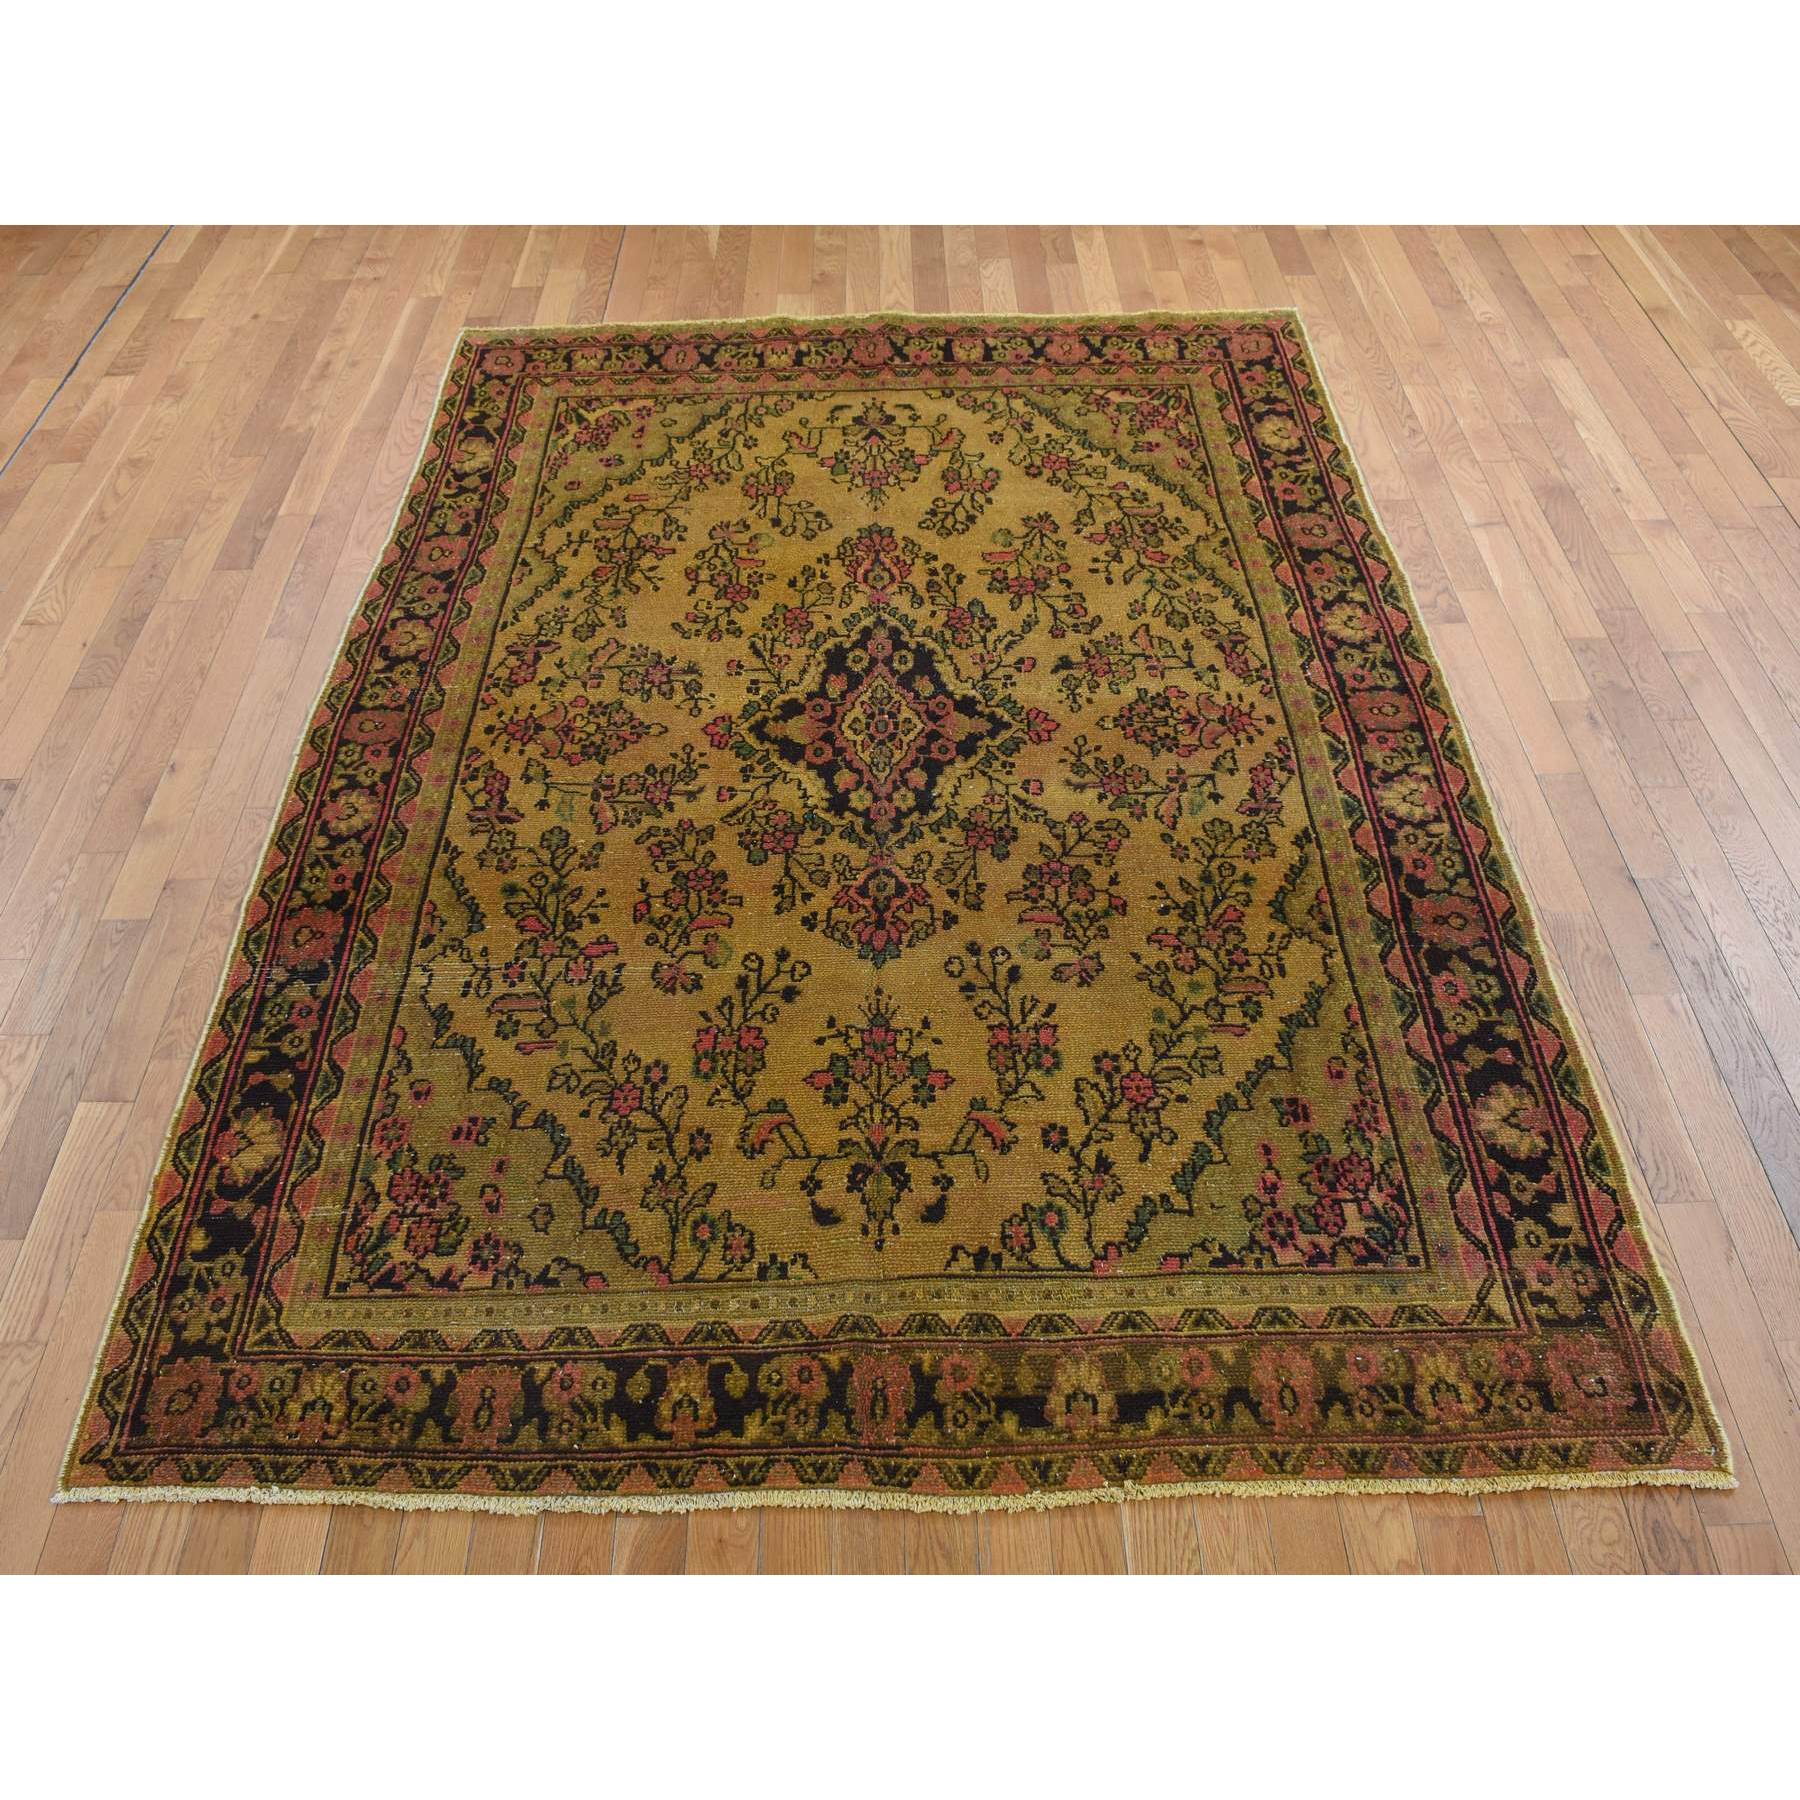  Wool Hand-Knotted Area Rug 6'6